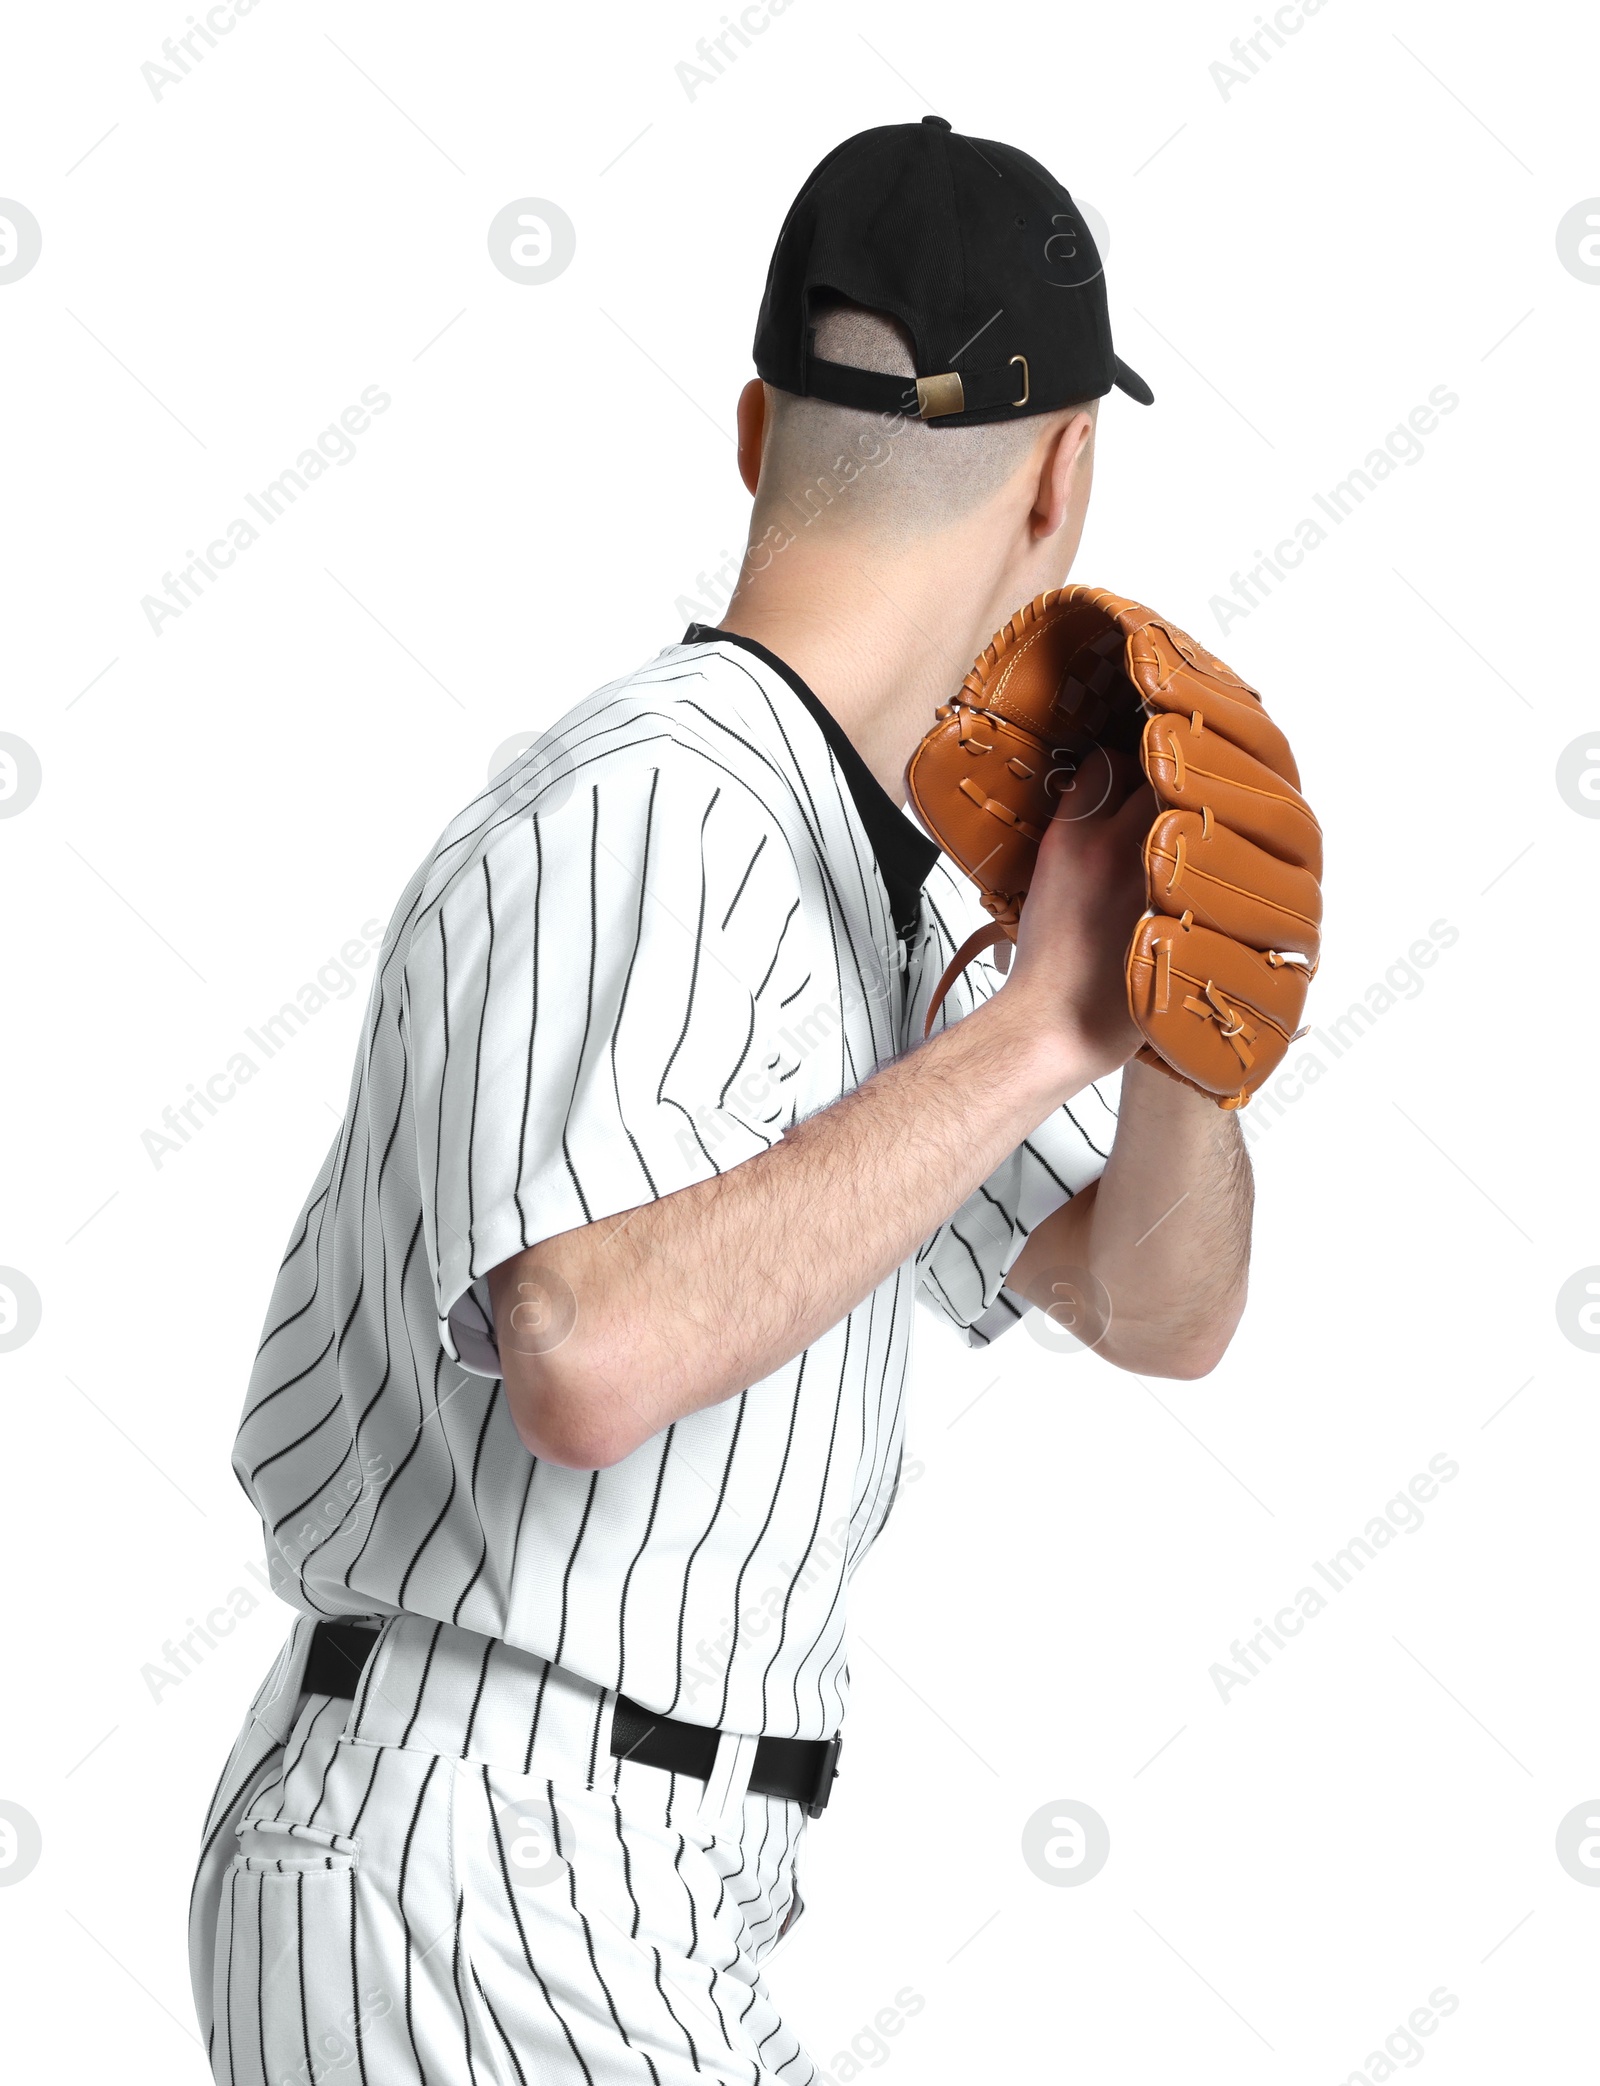 Photo of Baseball player with glove on white background, back view